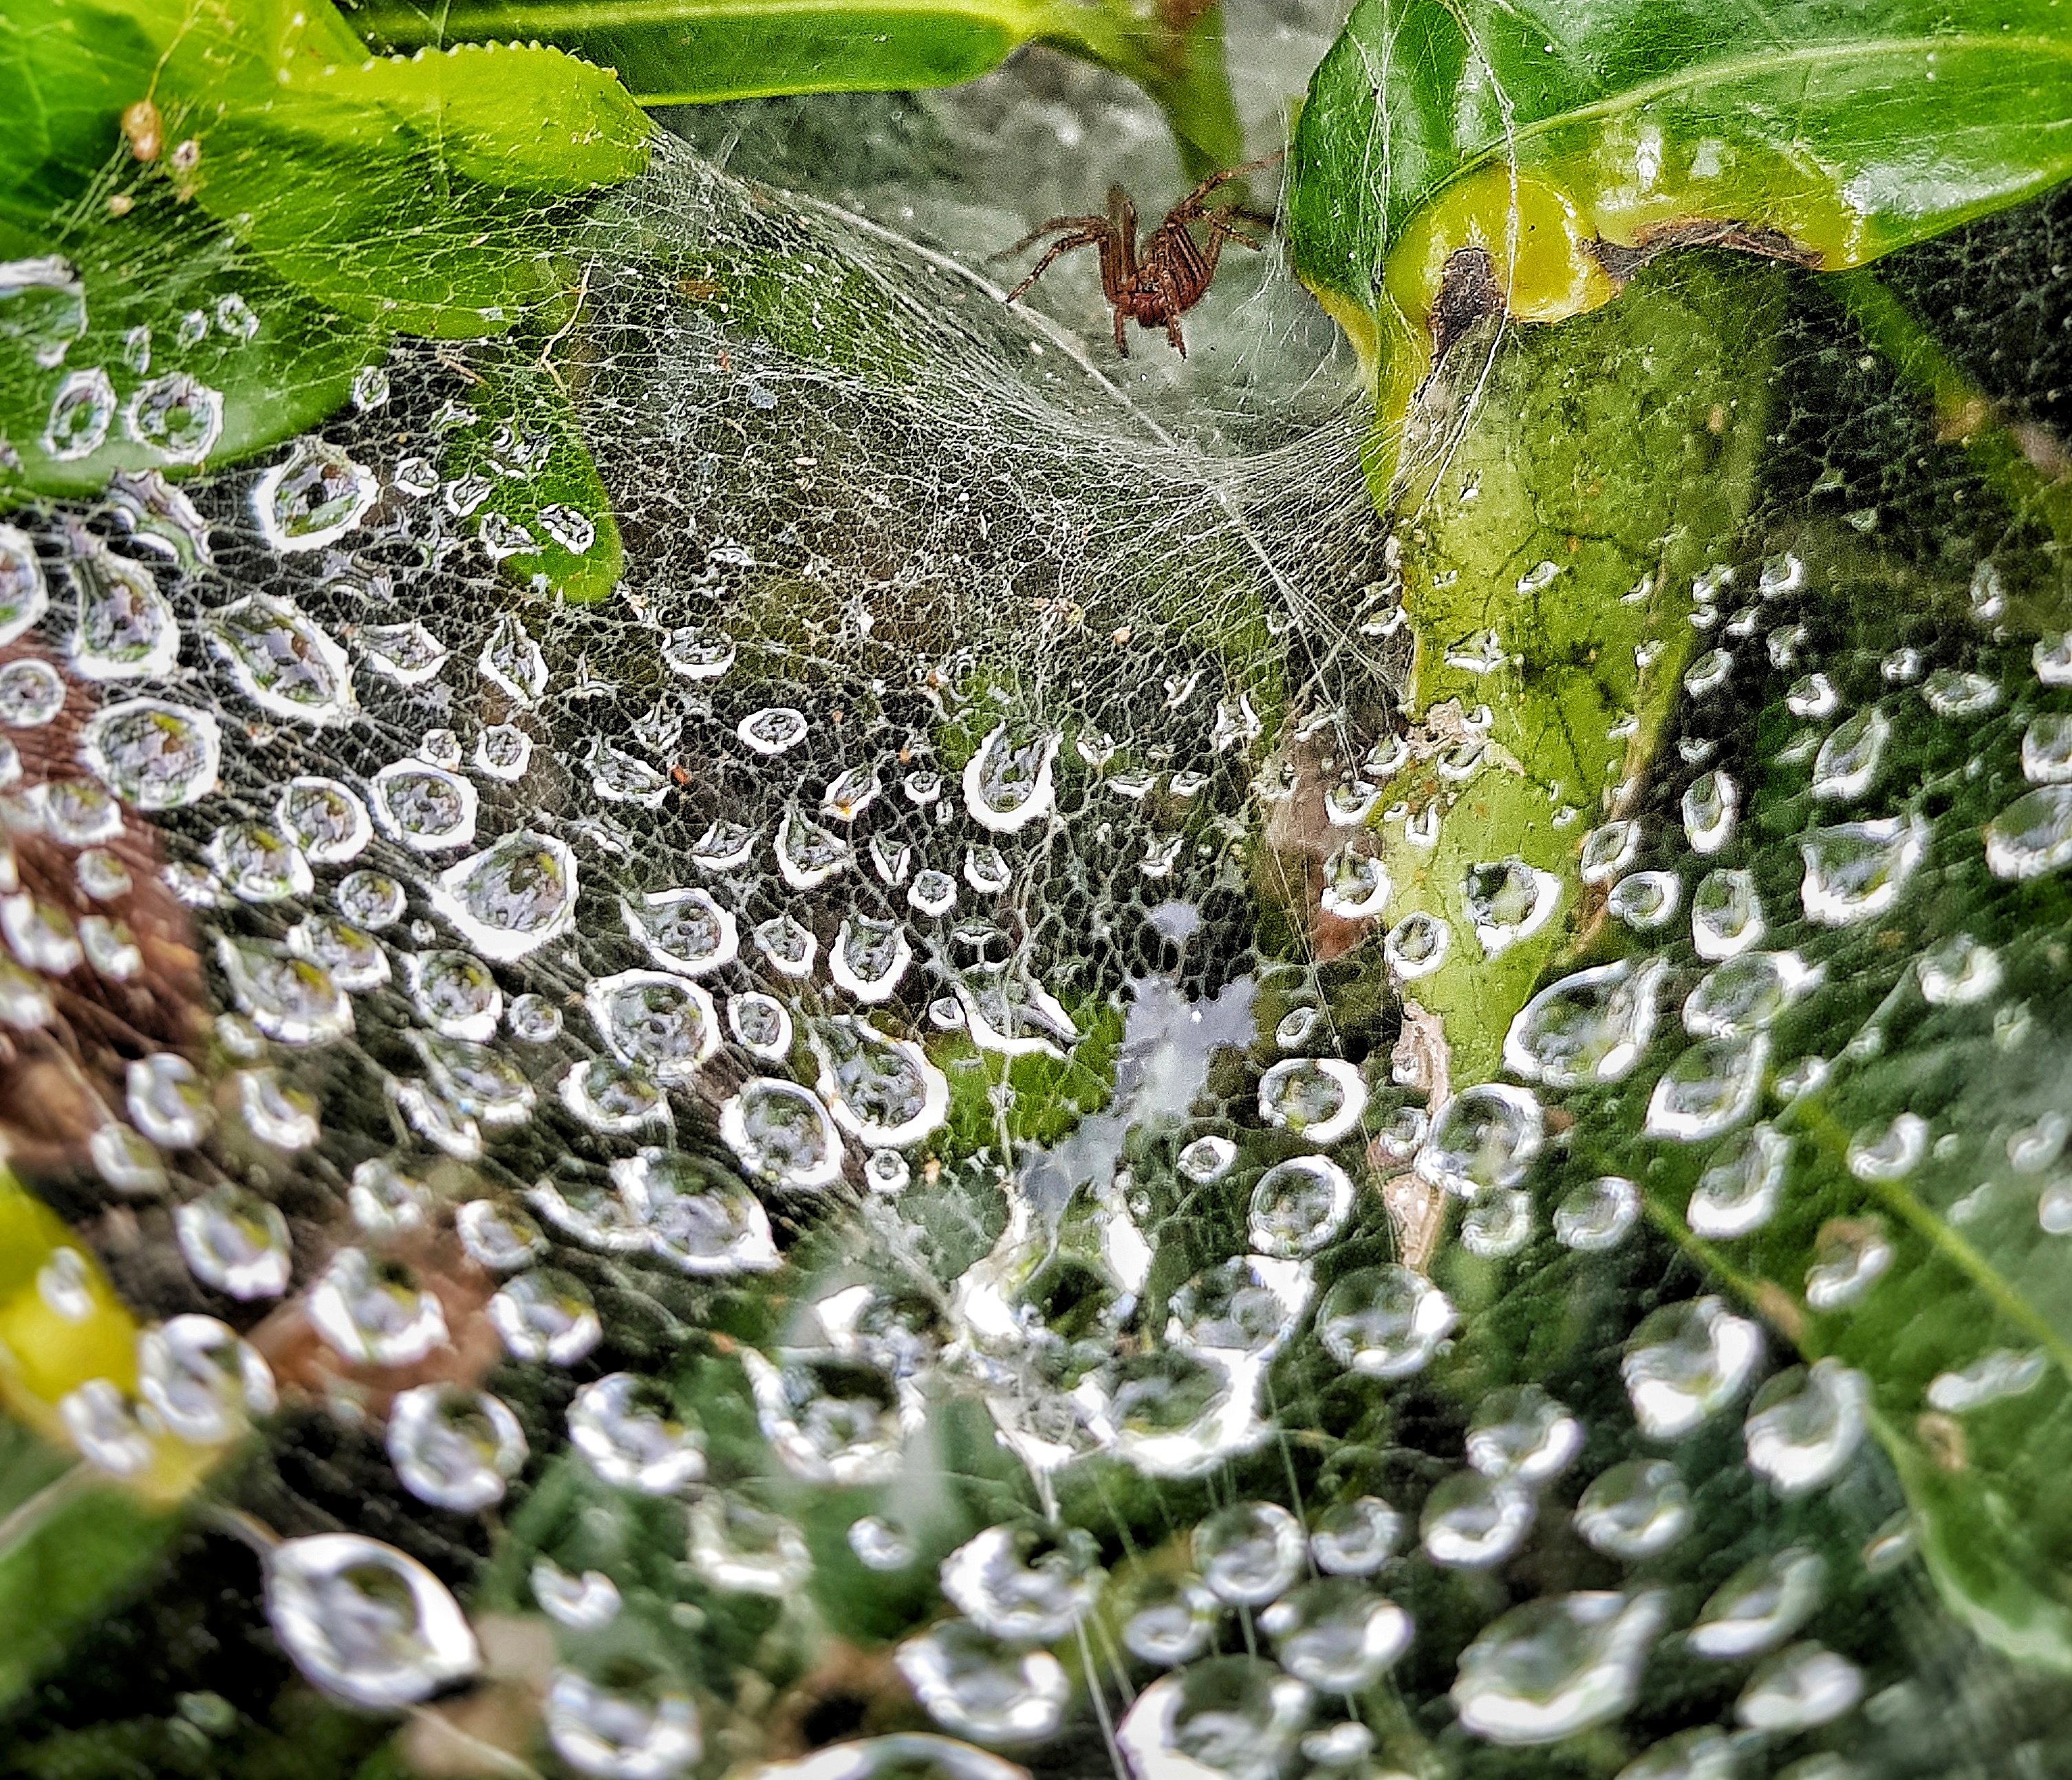 Spider on web covered by dew droplets